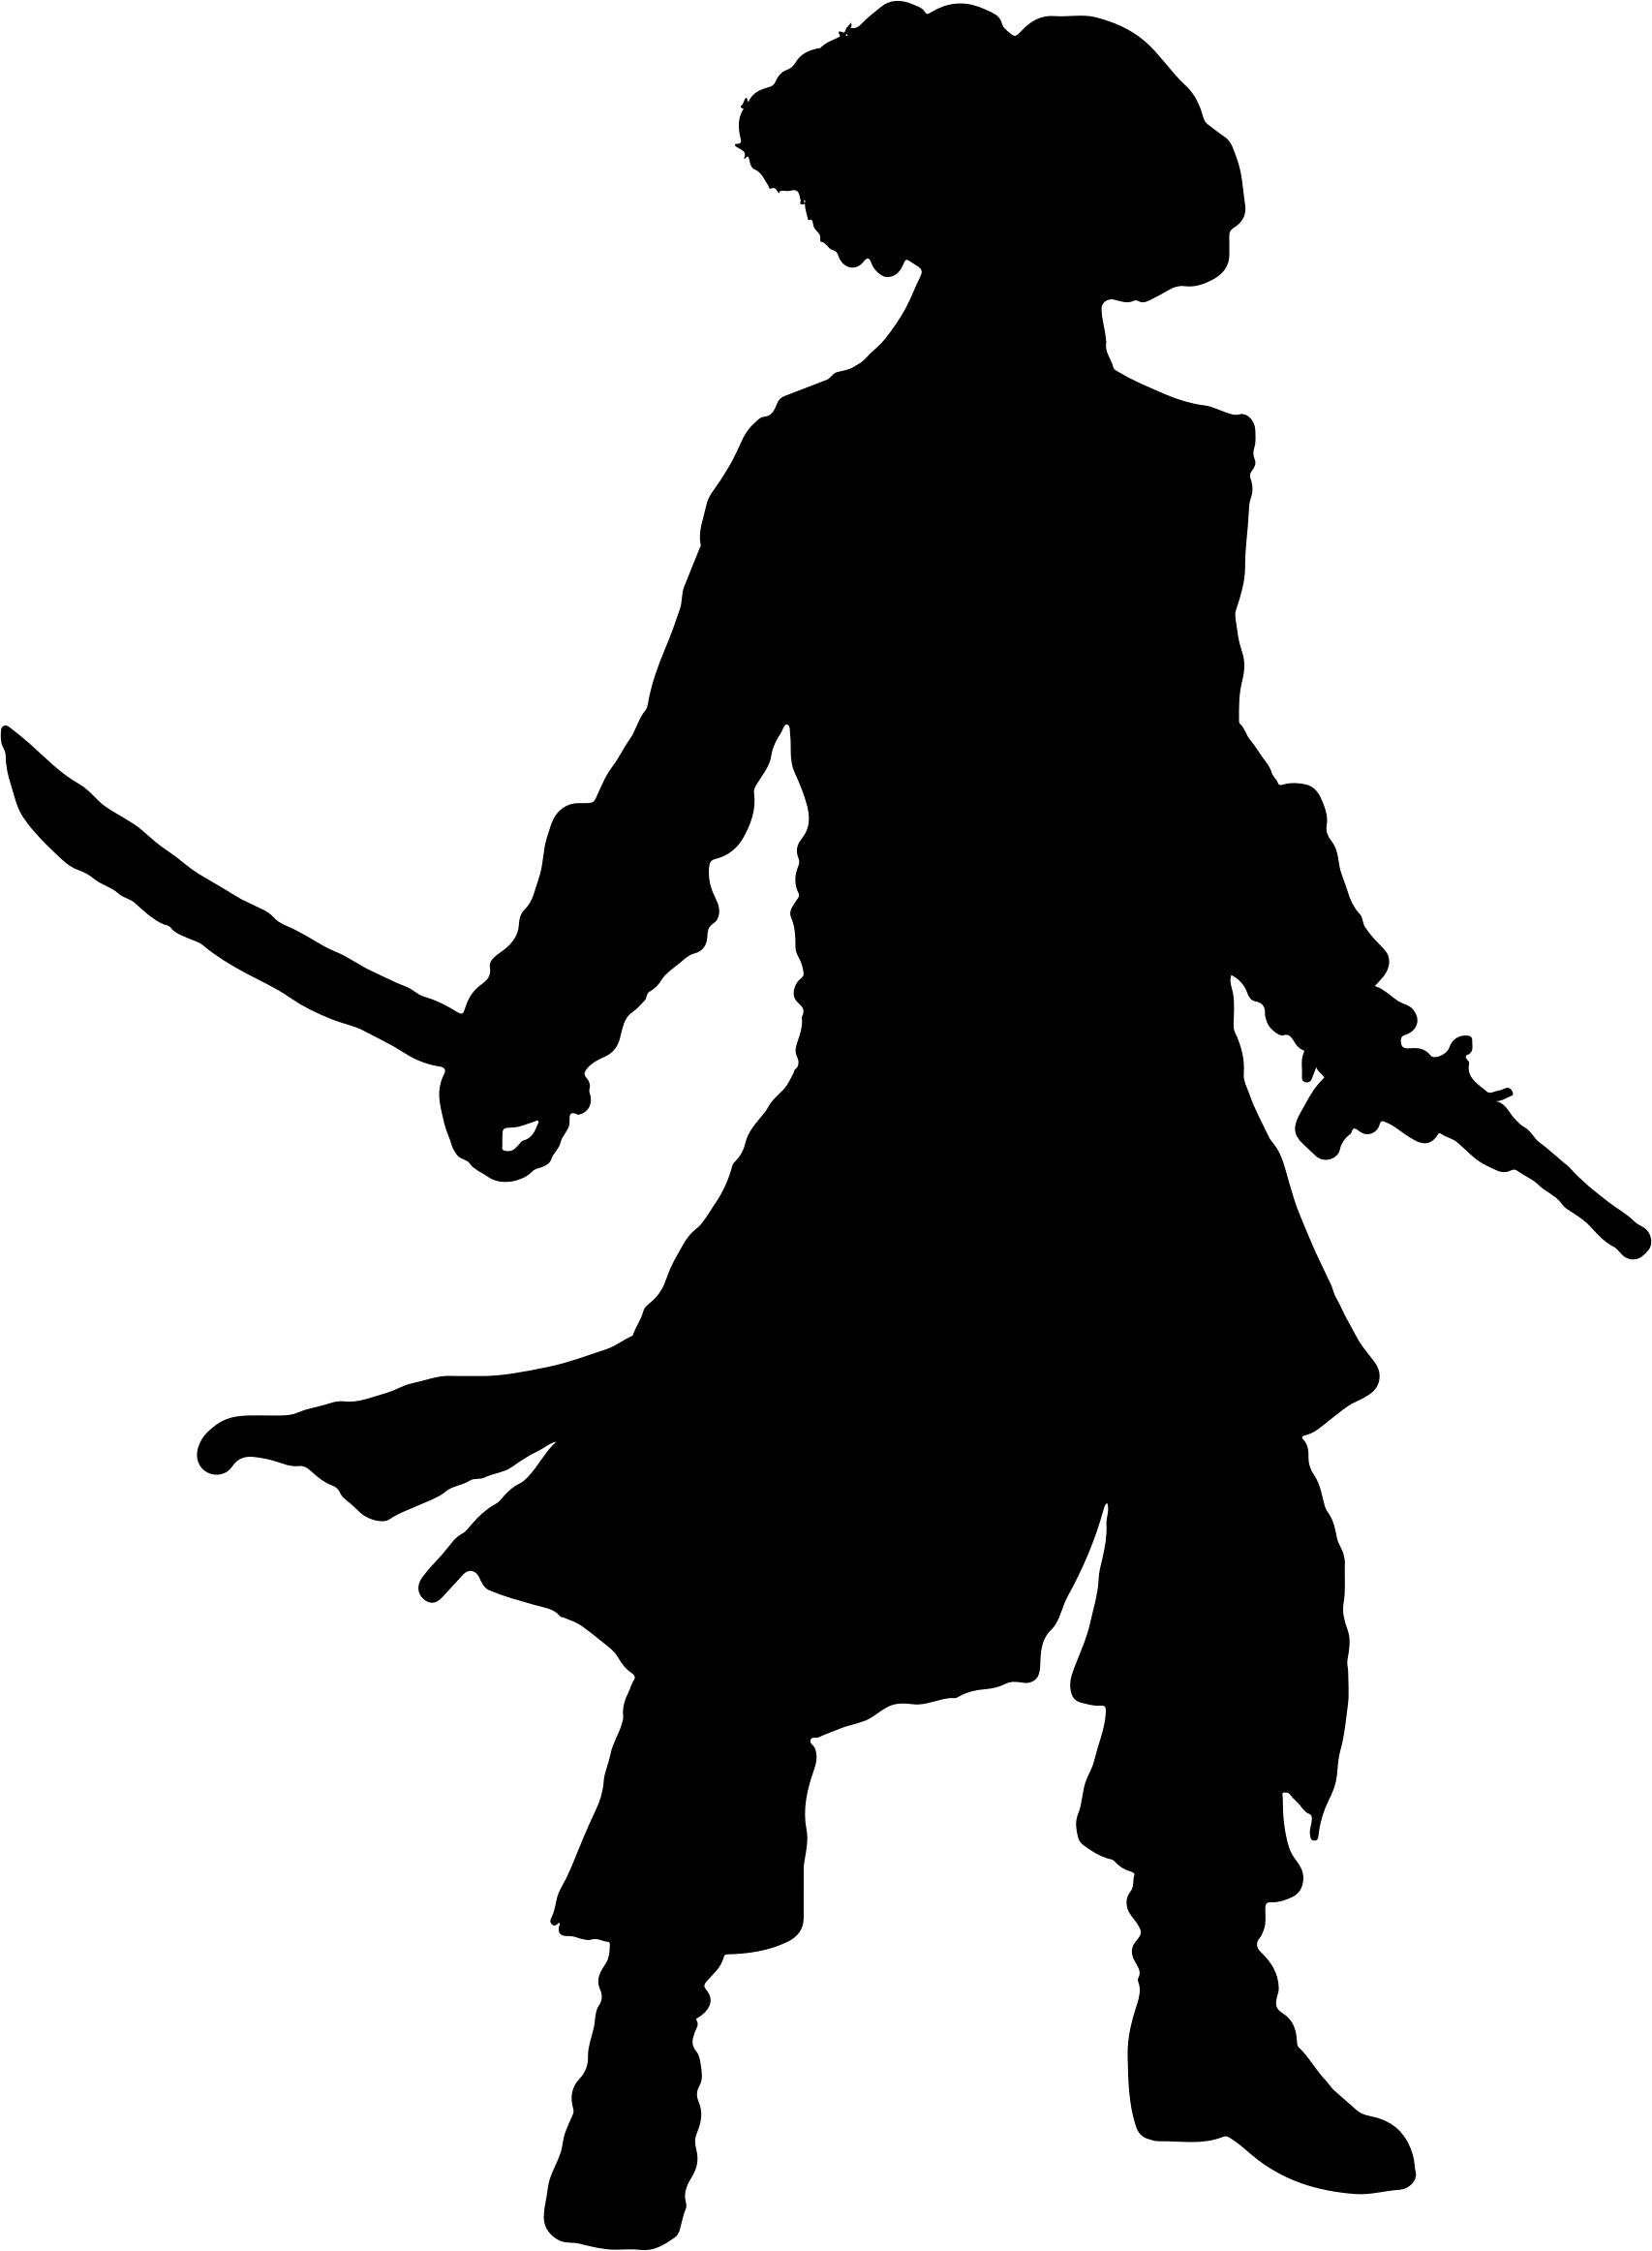 Pirate Silhouette png